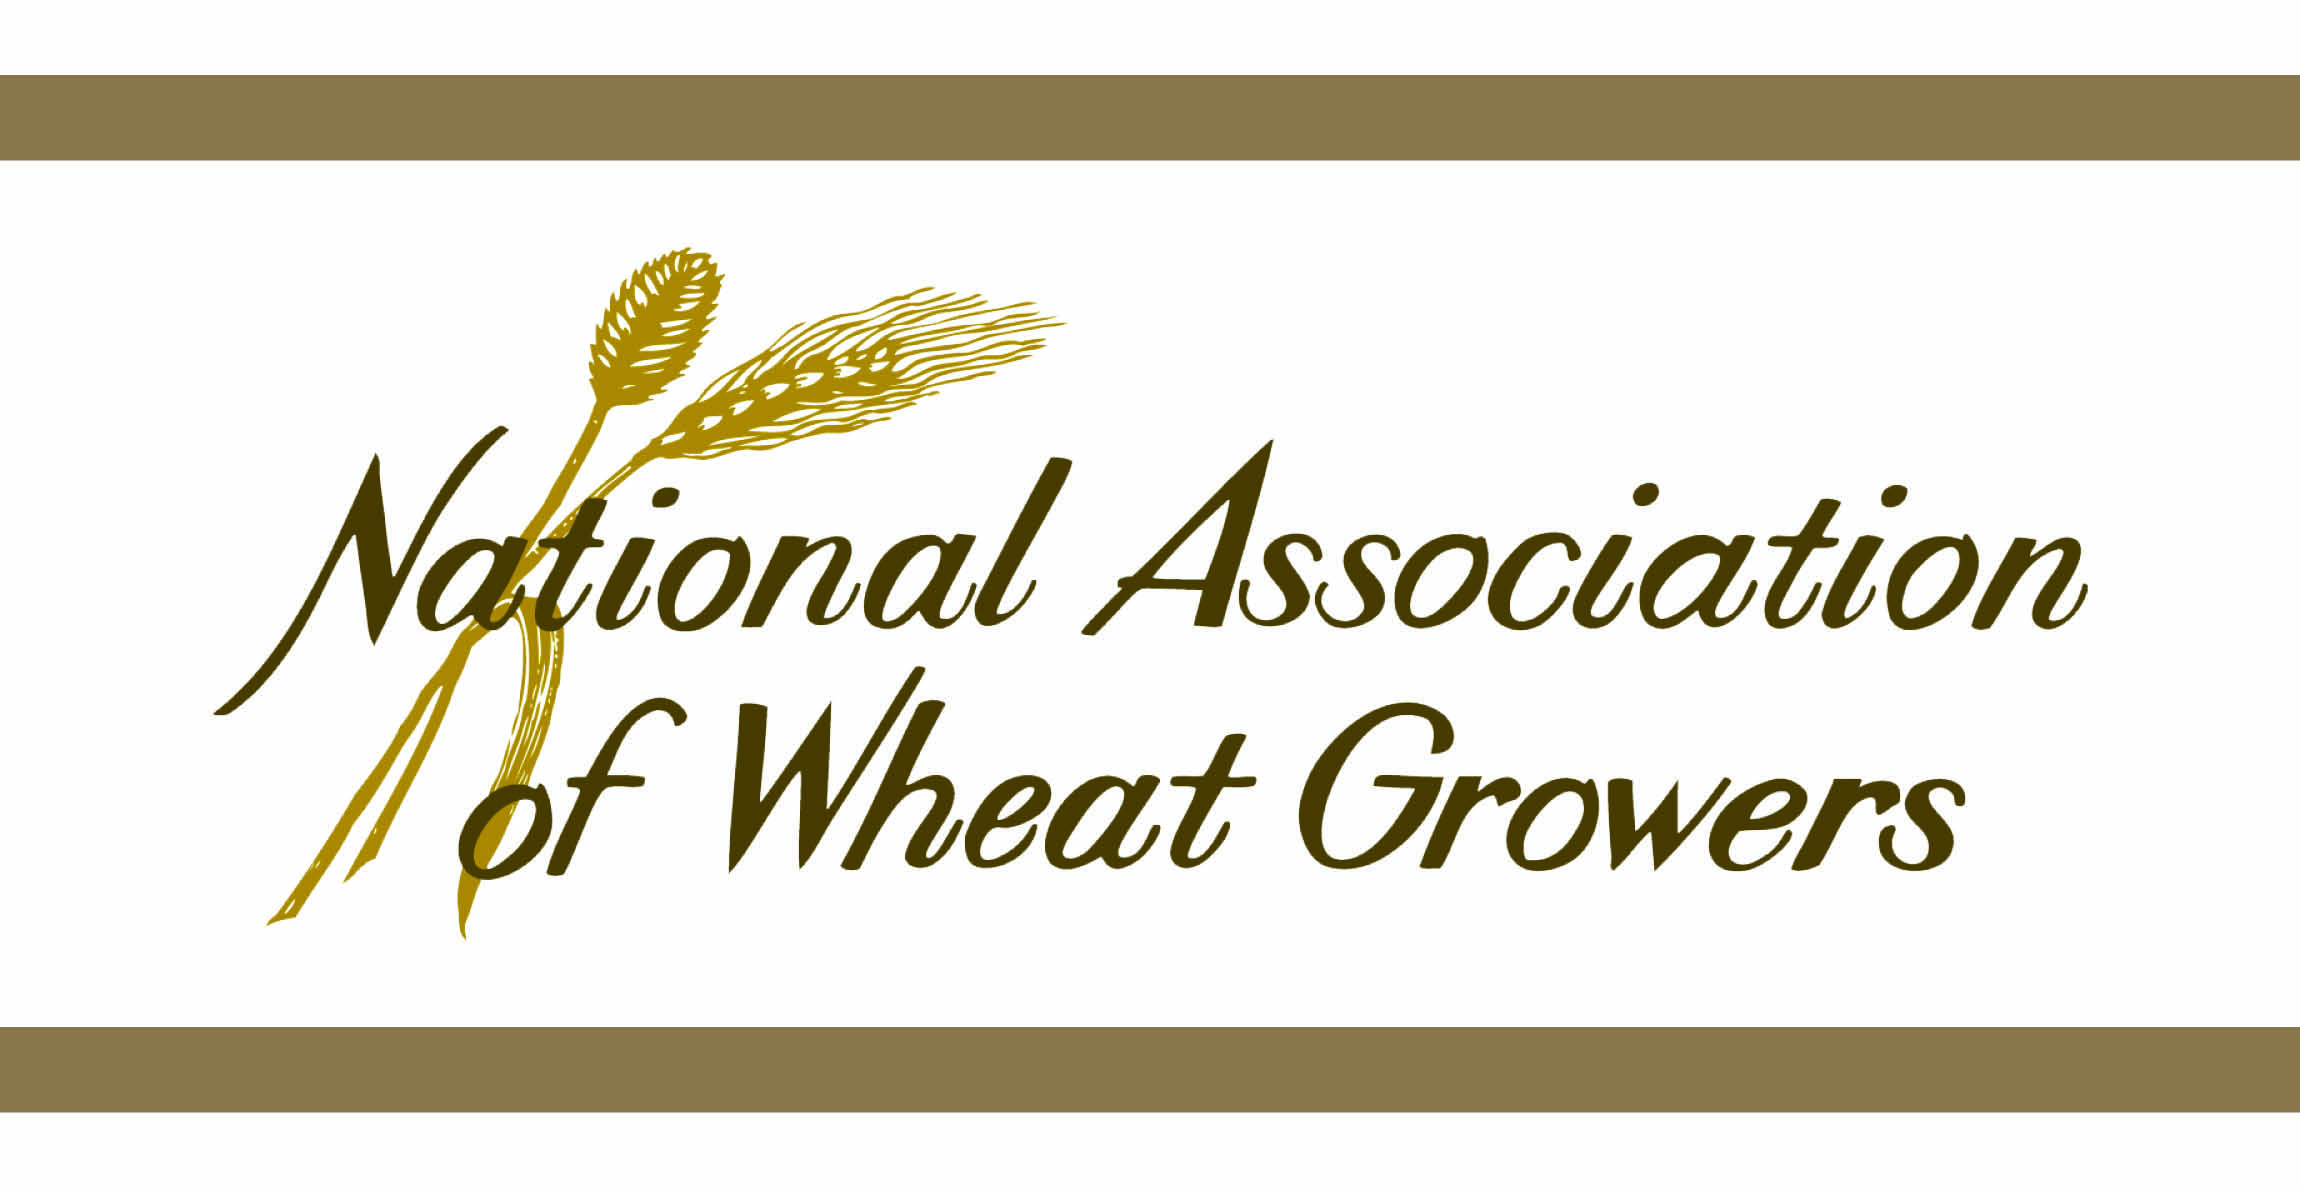 National Association of Wheat Growers Logo for Earth Day story